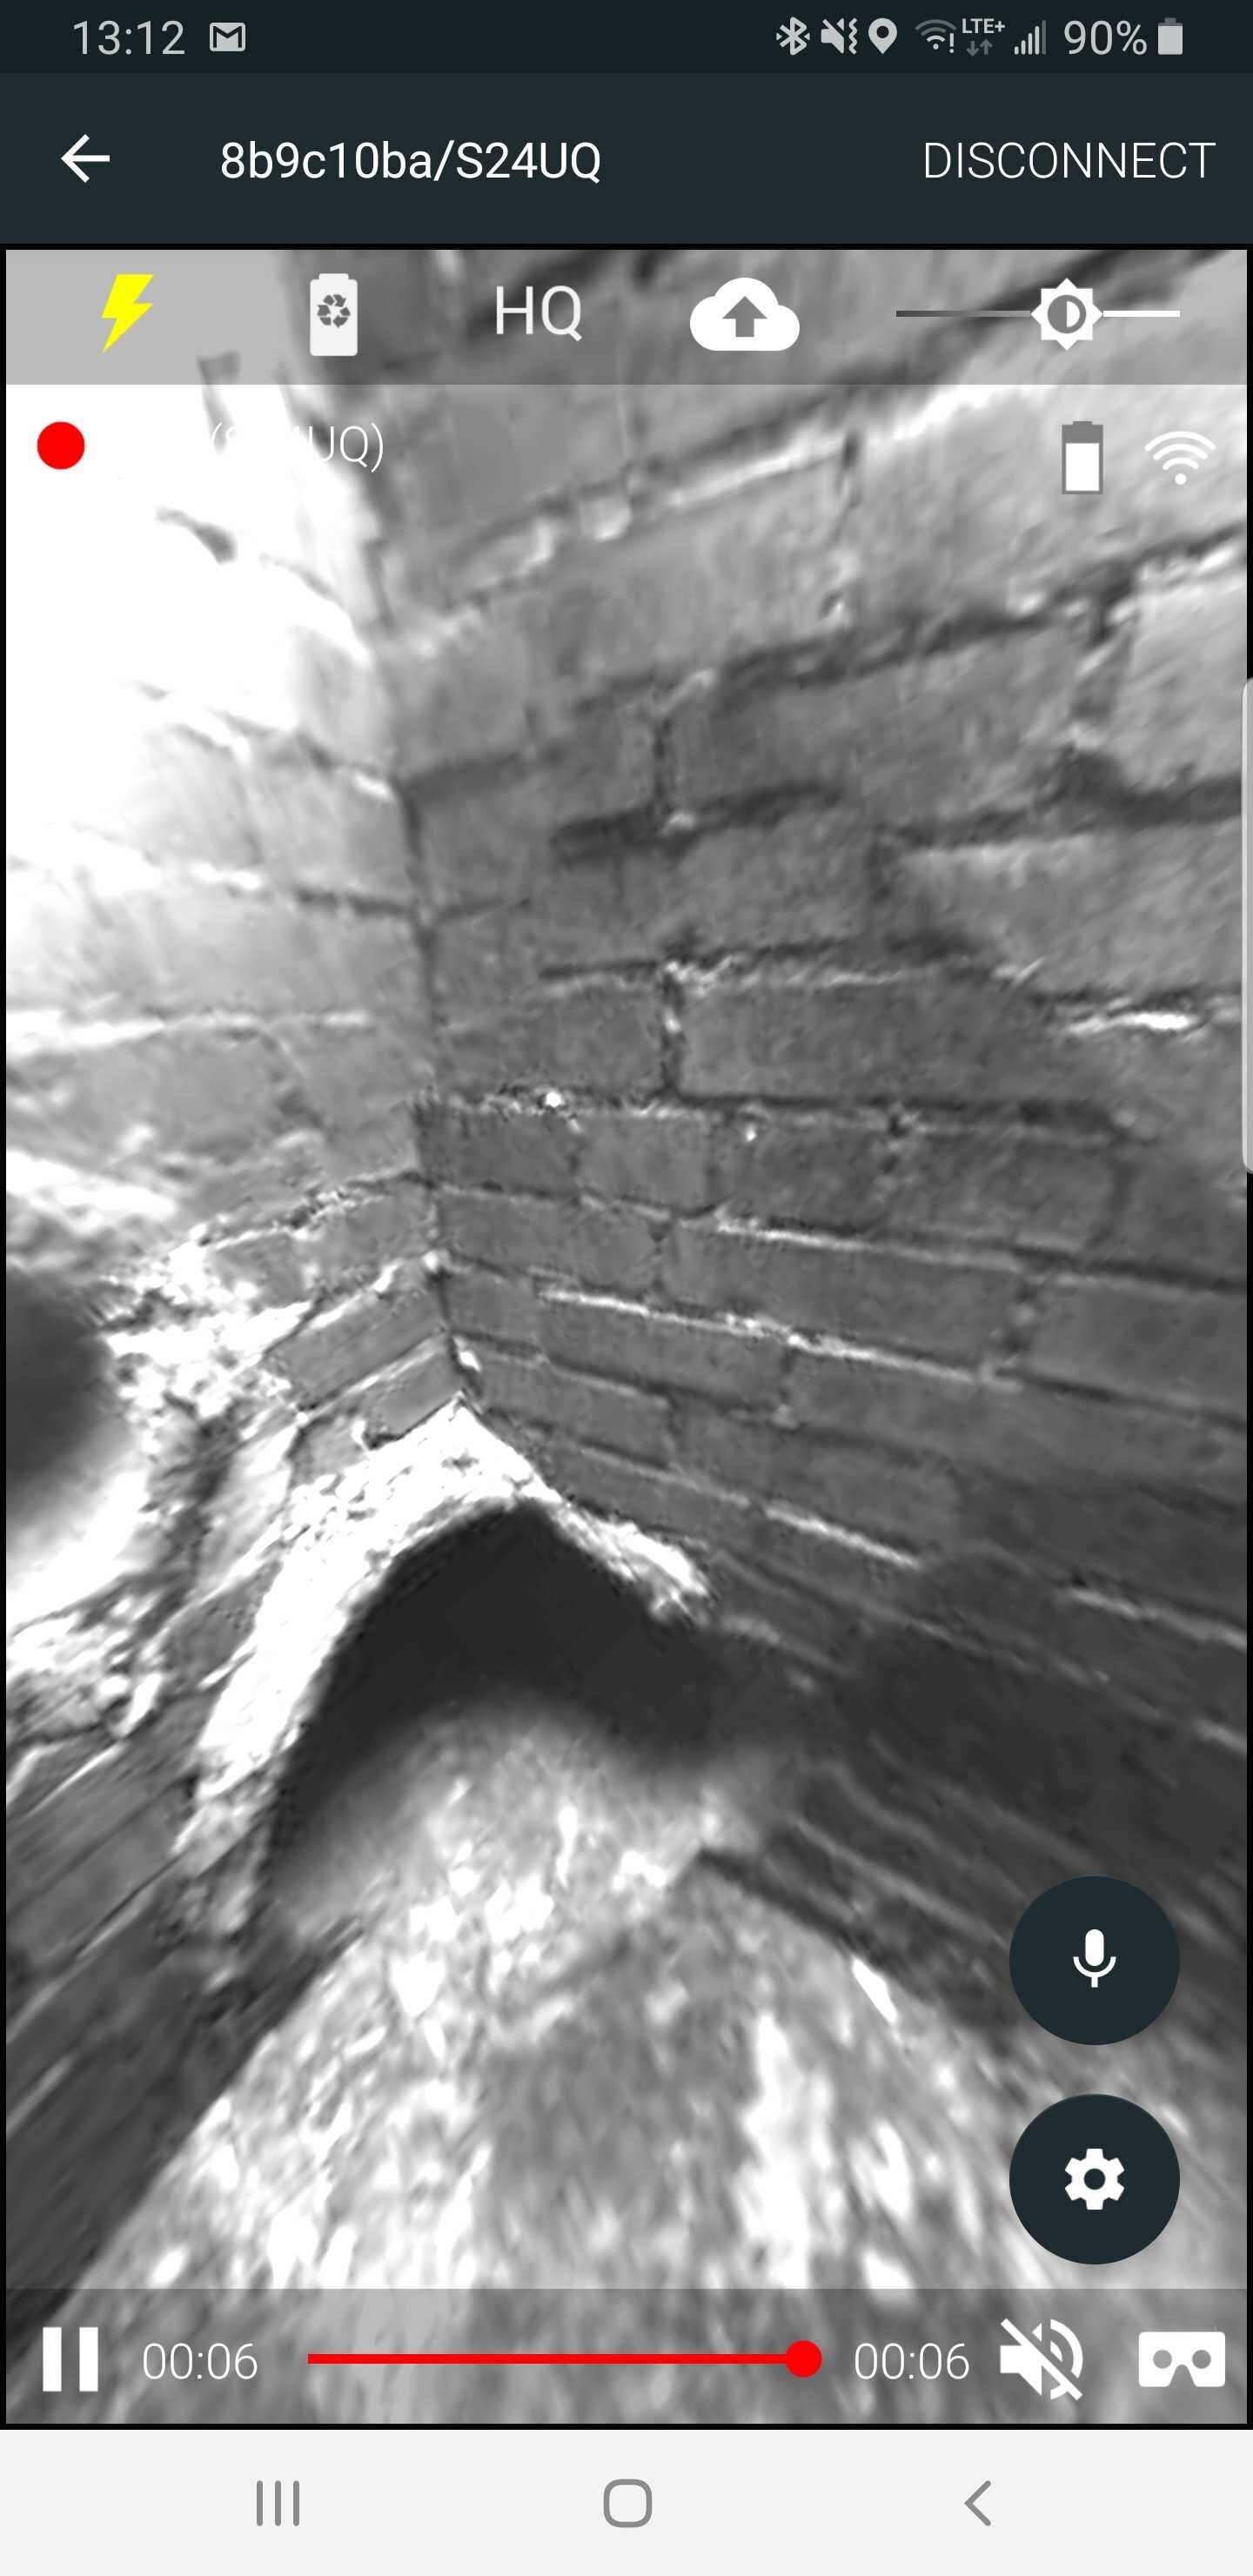 Screenshots of the access points at the bottom of this sewer as viewed on our Android/iOS application